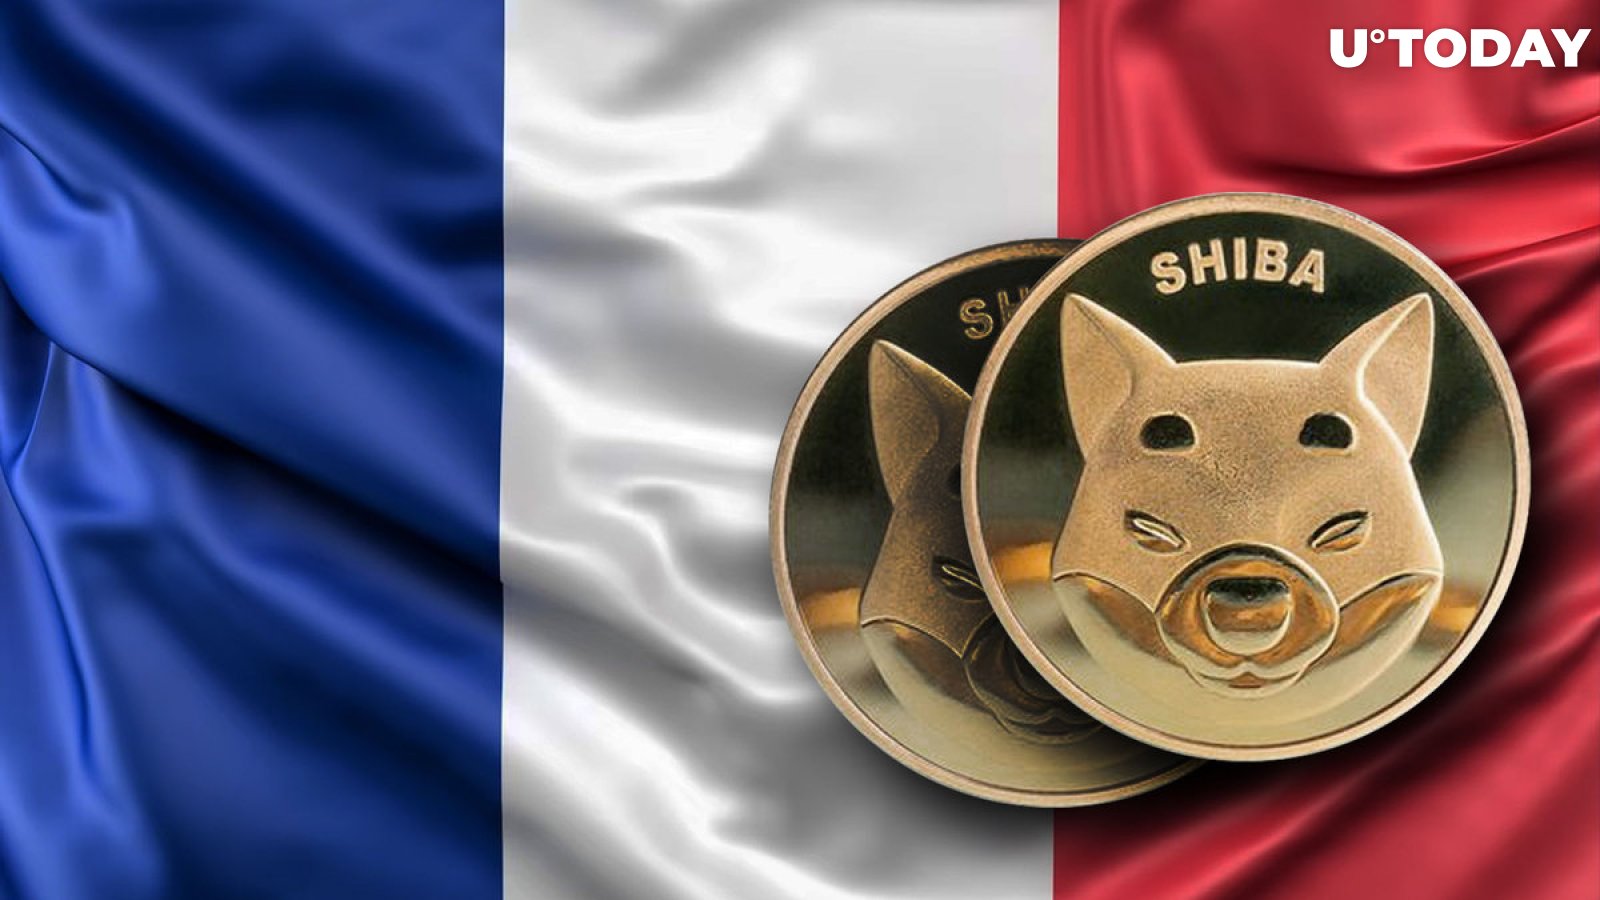 Shiba Inu (SHIB) Payments Accepted at Retail Stores in France via This Partnership